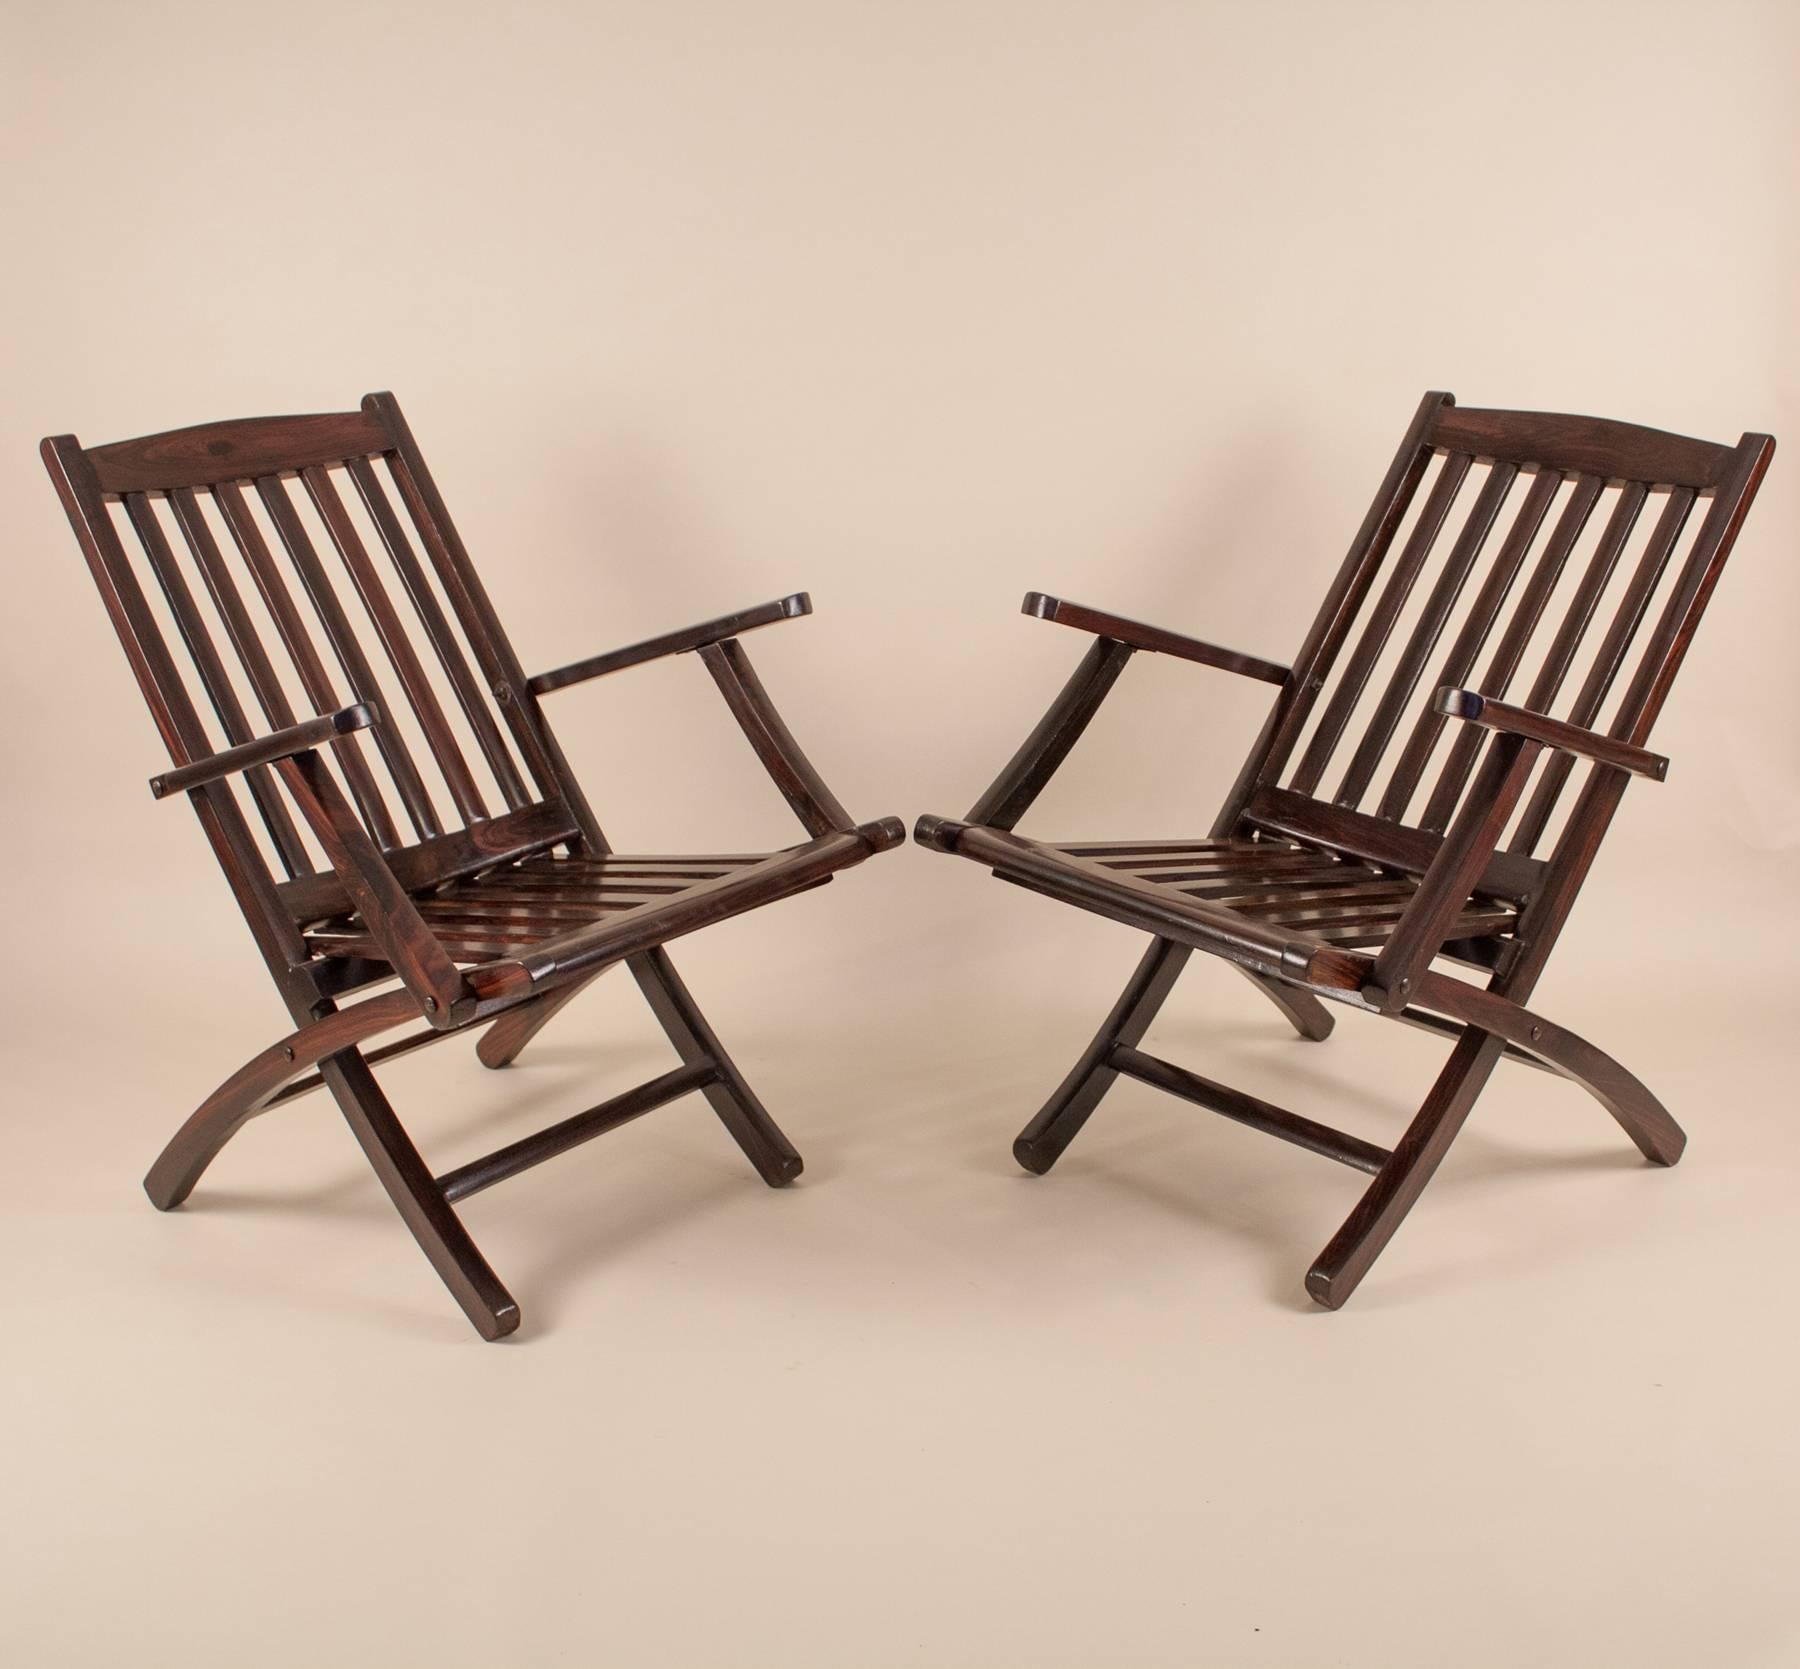 This pair of British folding steamer chairs evokes the romance of a mid-century voyage across the Indian ocean. As stylish as they are practical, these portable deck chairs have beautiful lines and are crafted from richly refinished rosewood. The